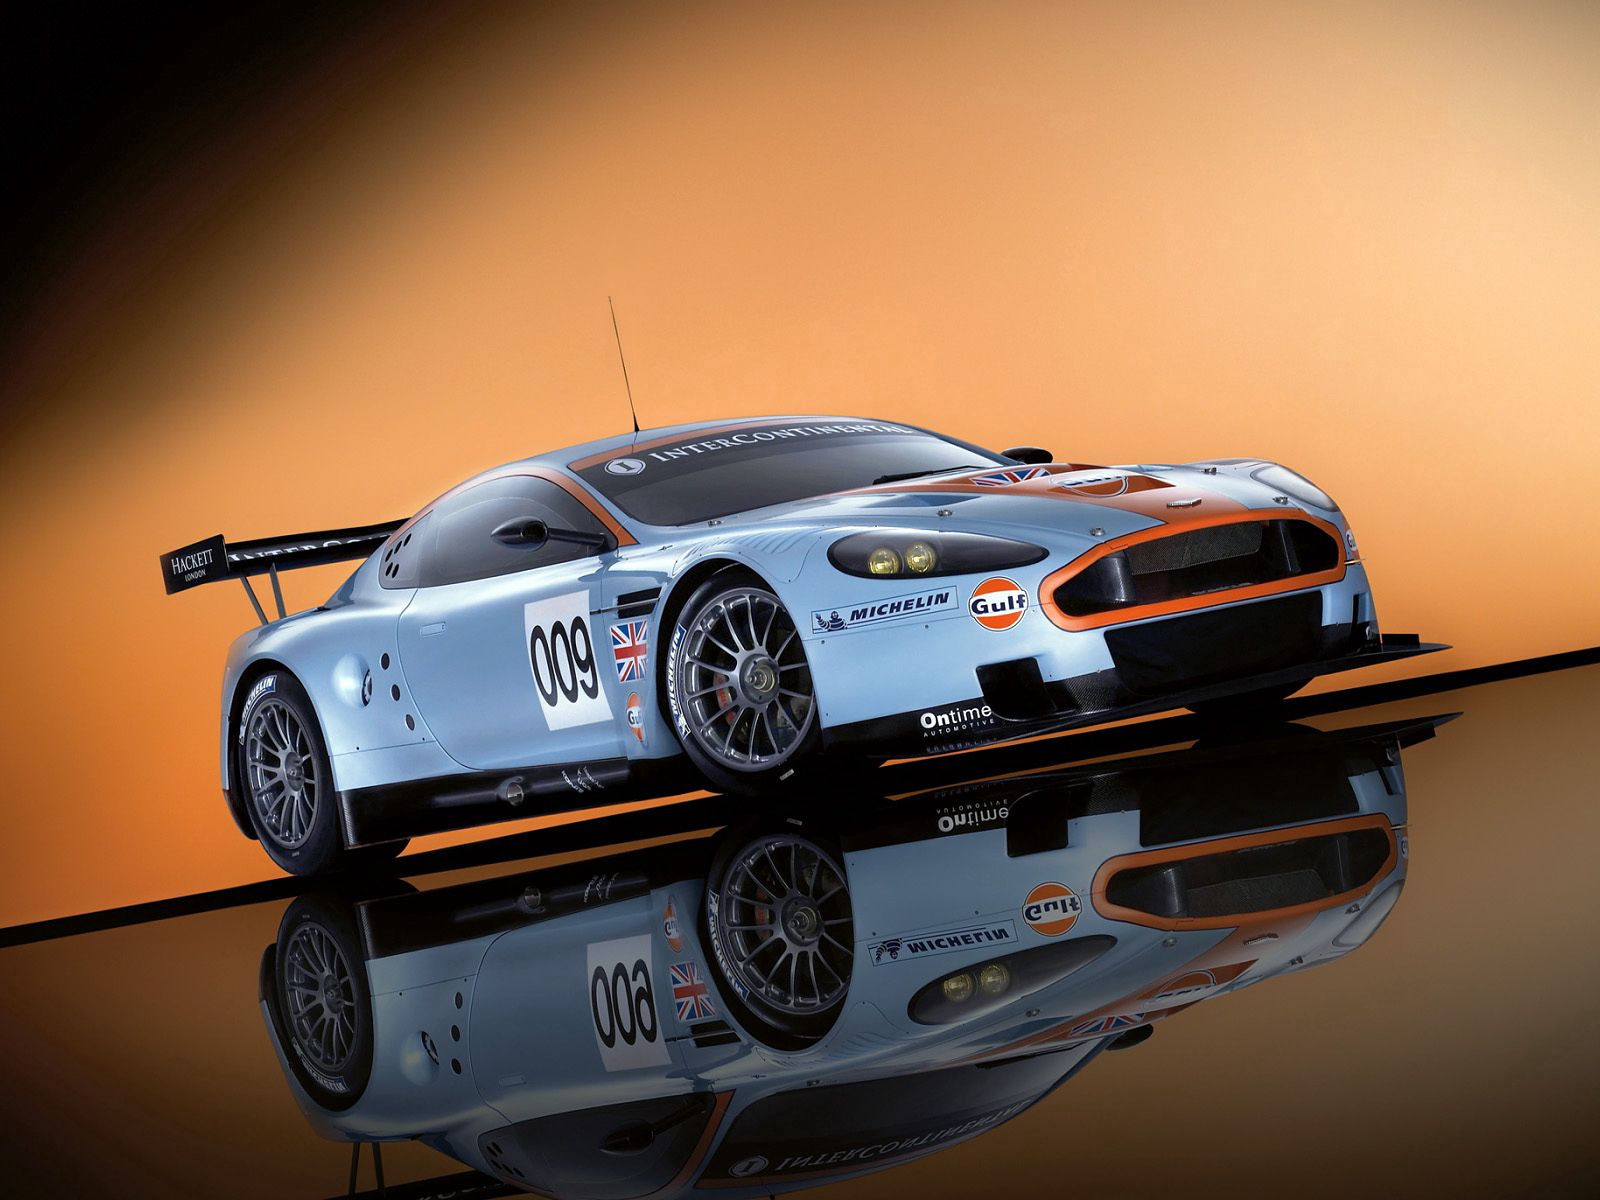 cars, auto, sports, aston martin, white, reflection, side view, style, 2008, dbr9 Full HD